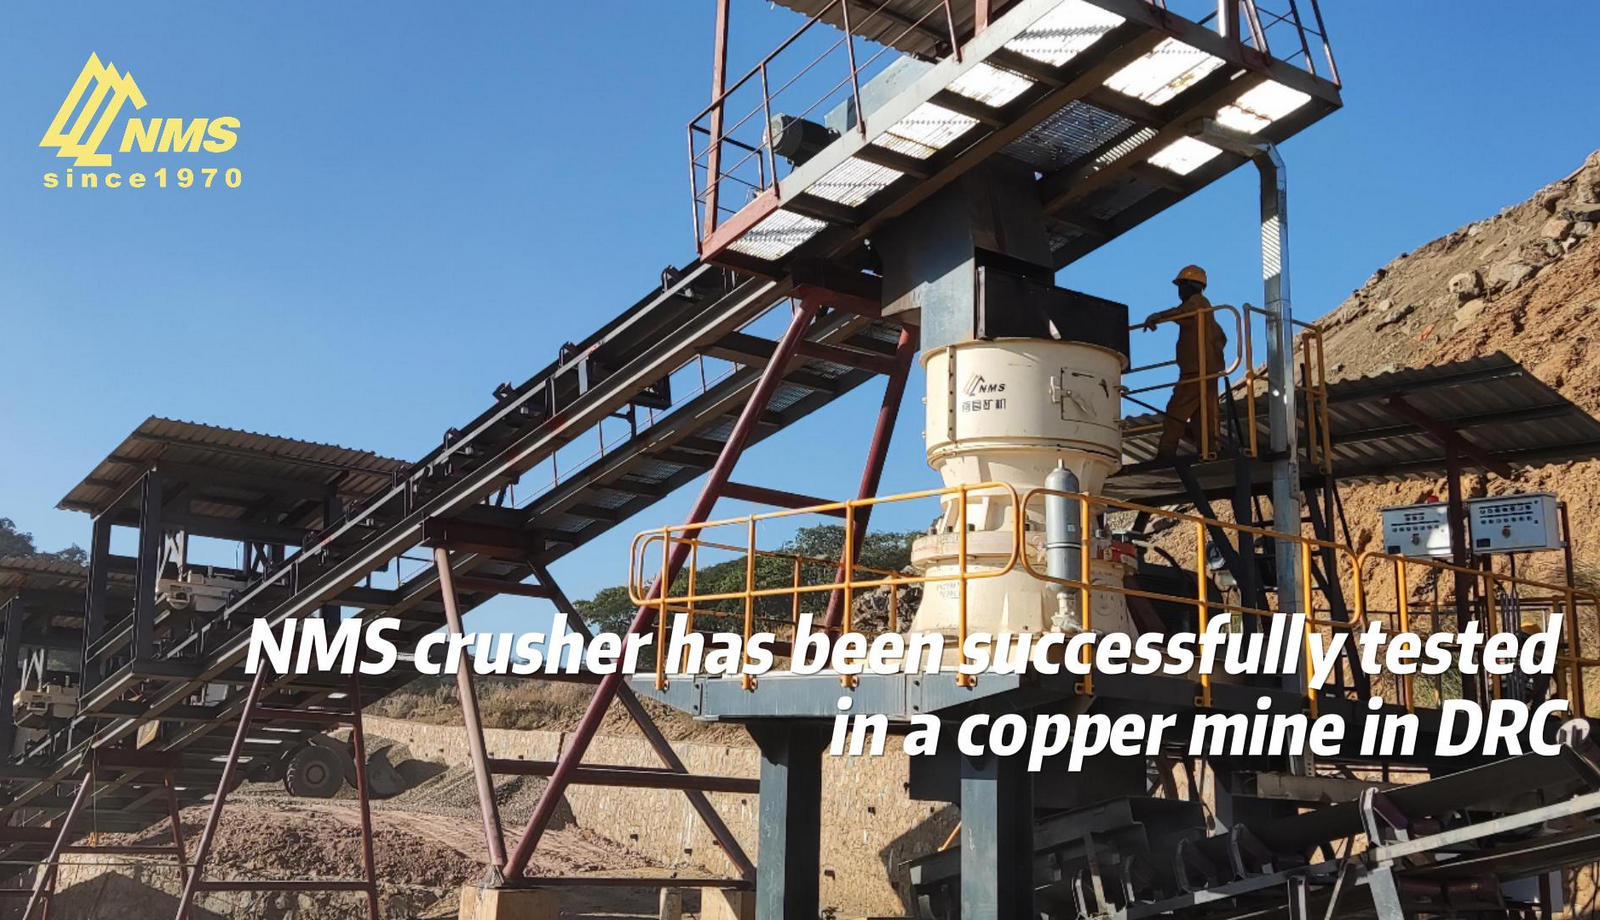 NMS crusher has been successfully tested in a copper mine in DRC